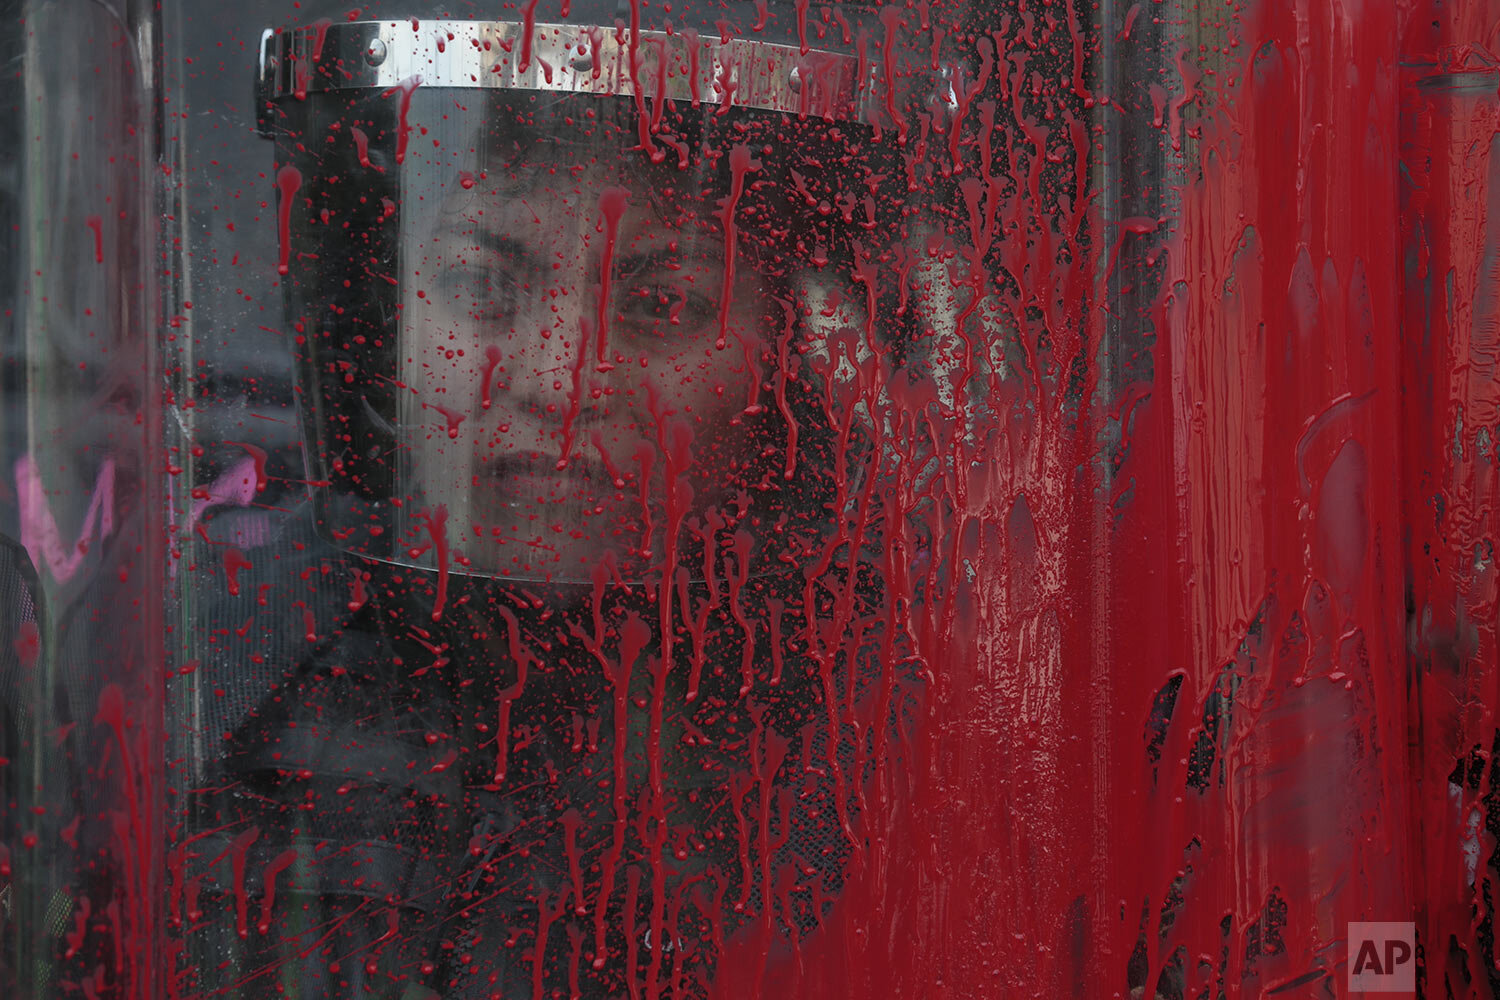  A police officer stands behind her riot shield covered in red paint during an International Women's Day march in Mexico City's main square, the Zocalo, March 8, 2020. Protests against gender violence in Mexico have intensified in recent years amid a